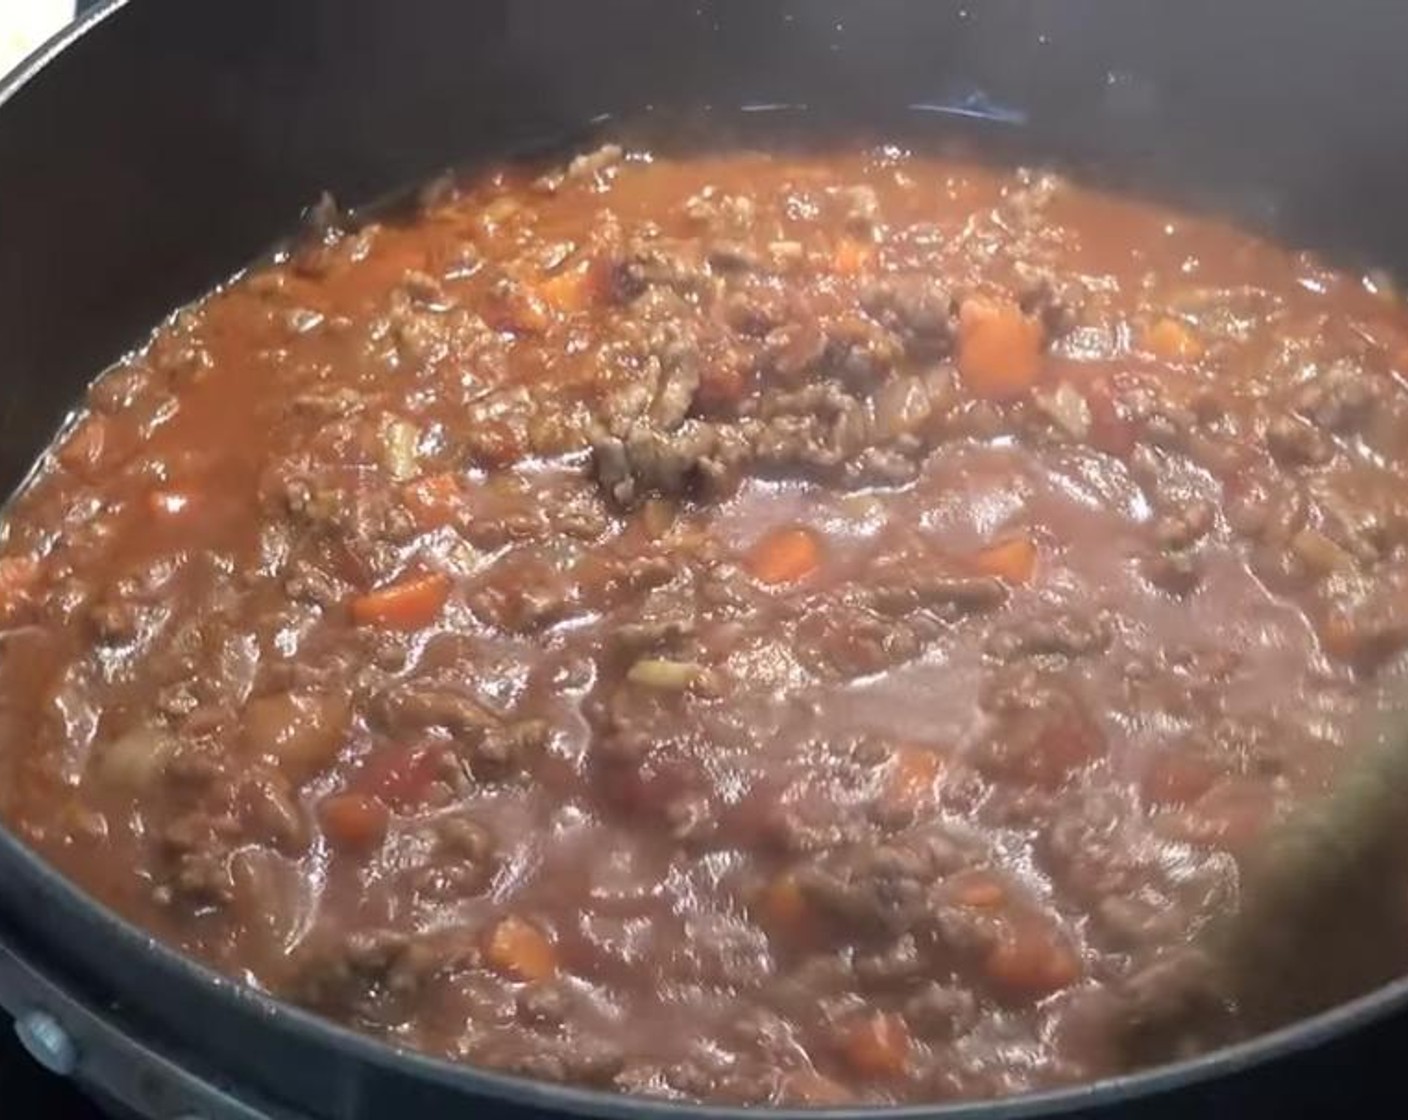 step 4 Add Tomato Paste (1/4 cup), Canned Diced Tomatoes (1 3/4 cups), and Beef Stock (1 cup). Stir together, slightly reduce the heat, and allow to simmer for about 20 minutes or until the mixture has slightly thickened up.